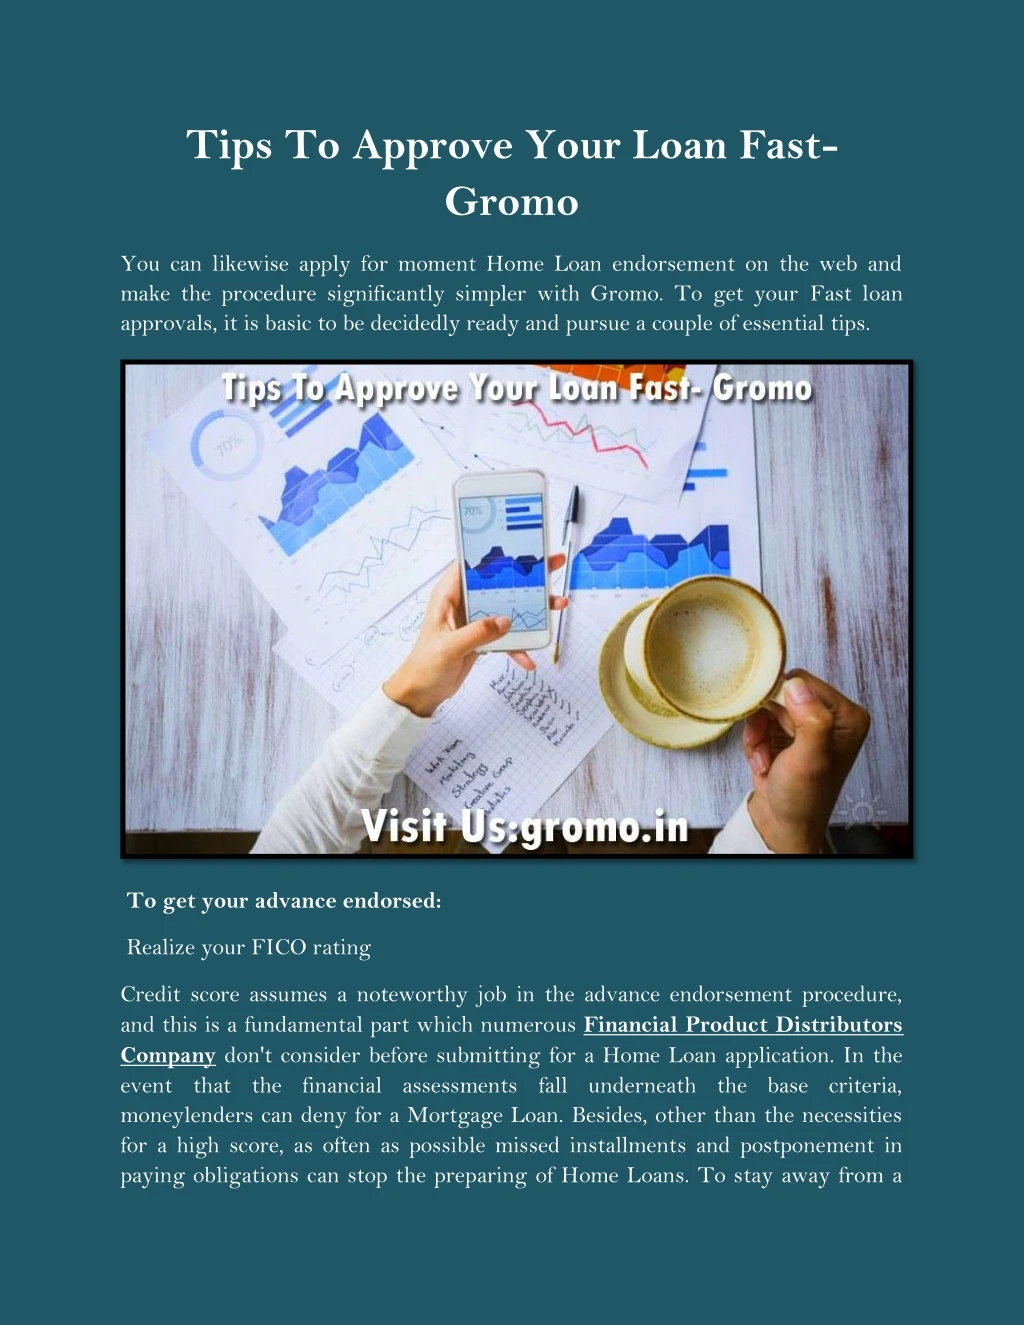 tips to approve your loan fast gromo